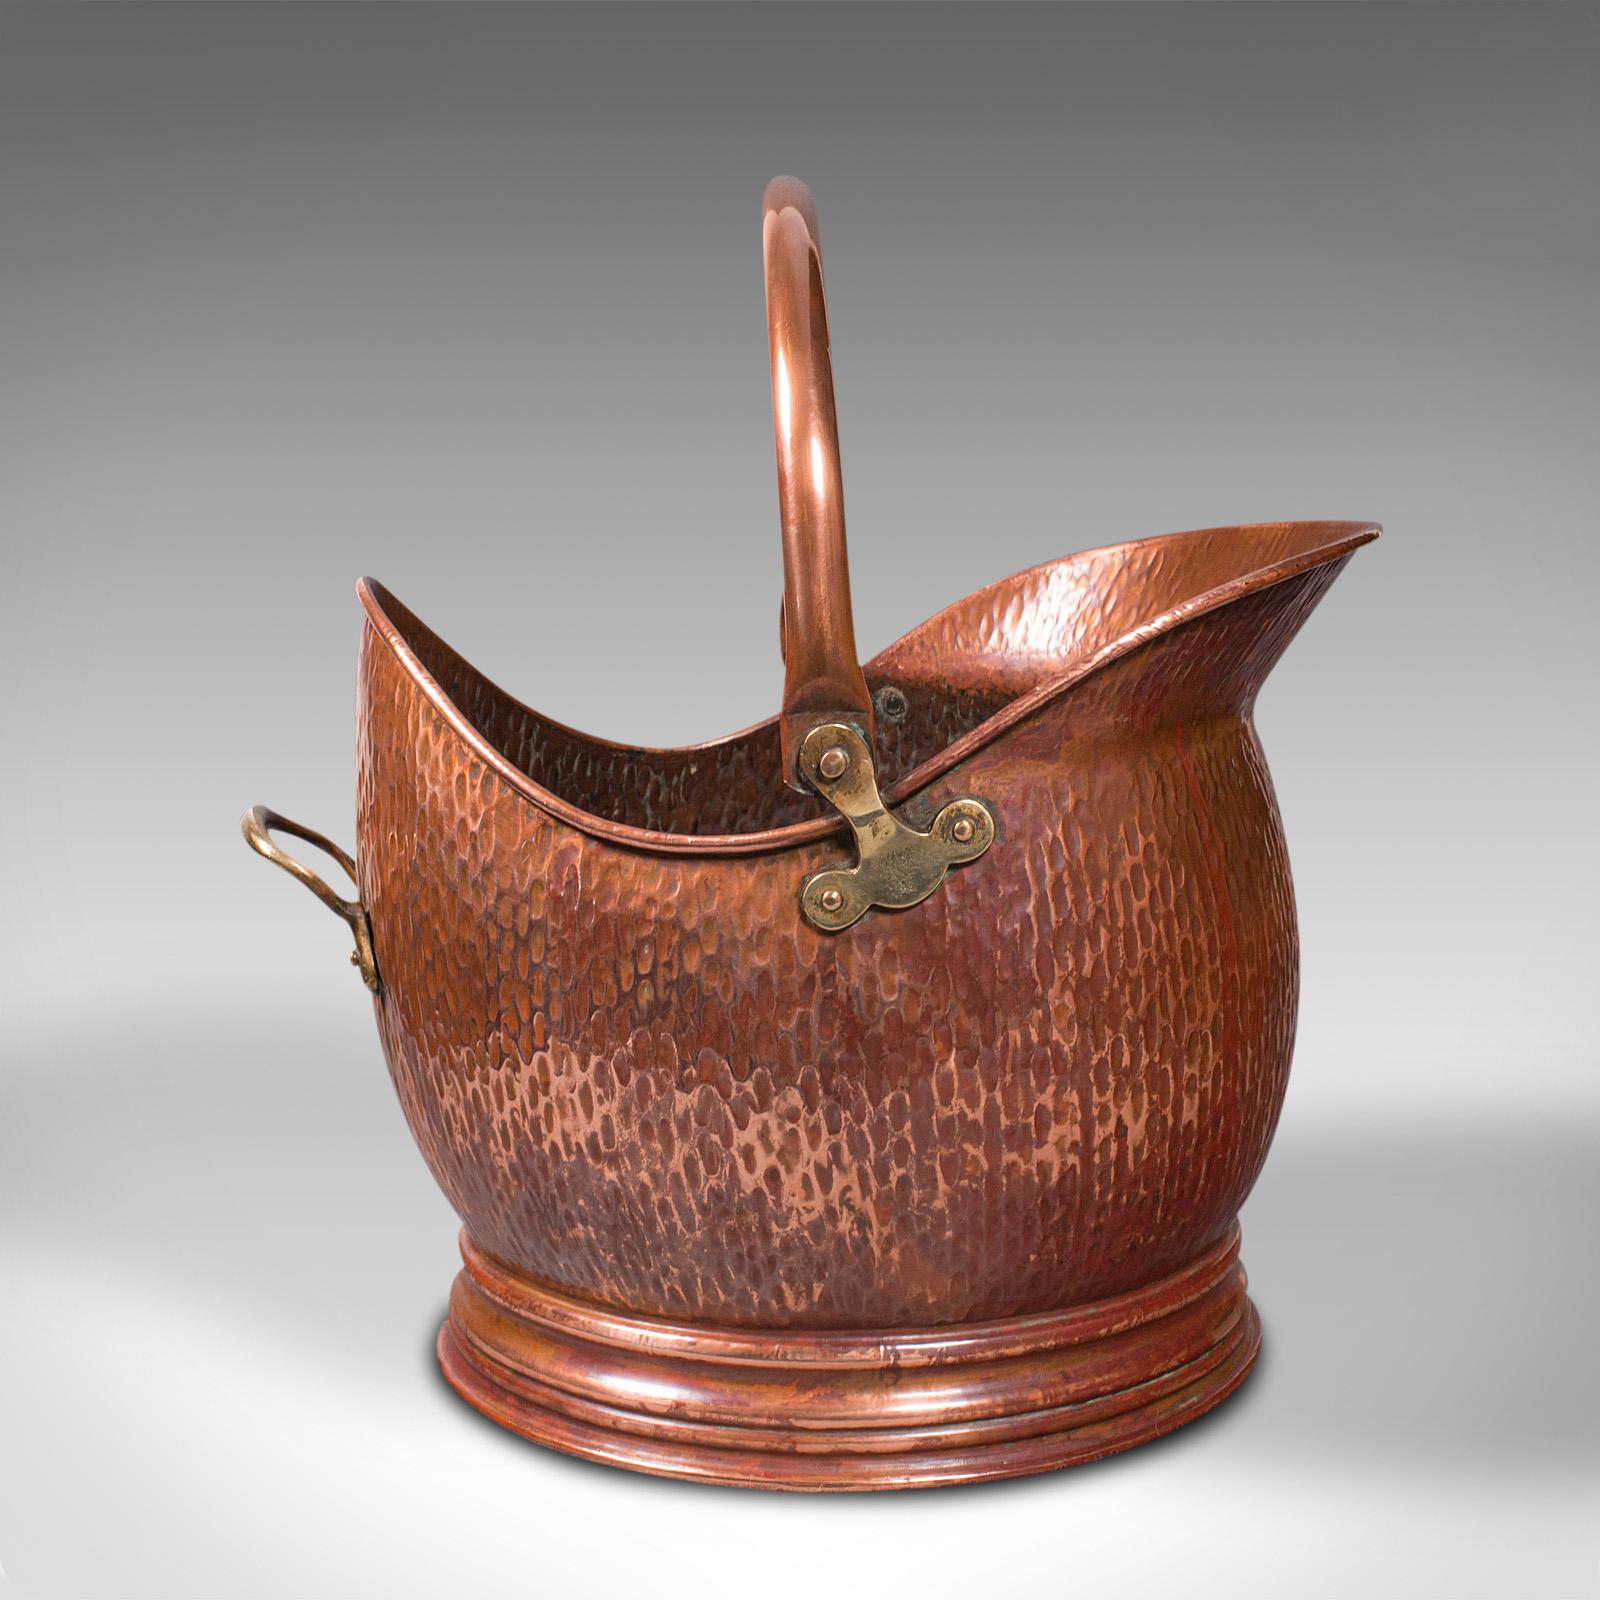 This is an antique helmet scuttle. An English, copper coal bucket or fireside bin, dating to the Edwardian period, circa 1910.

Delightful helmet shaped scuttle with appealing beaten finish
Displays a desirable aged patina and in good order
Copper